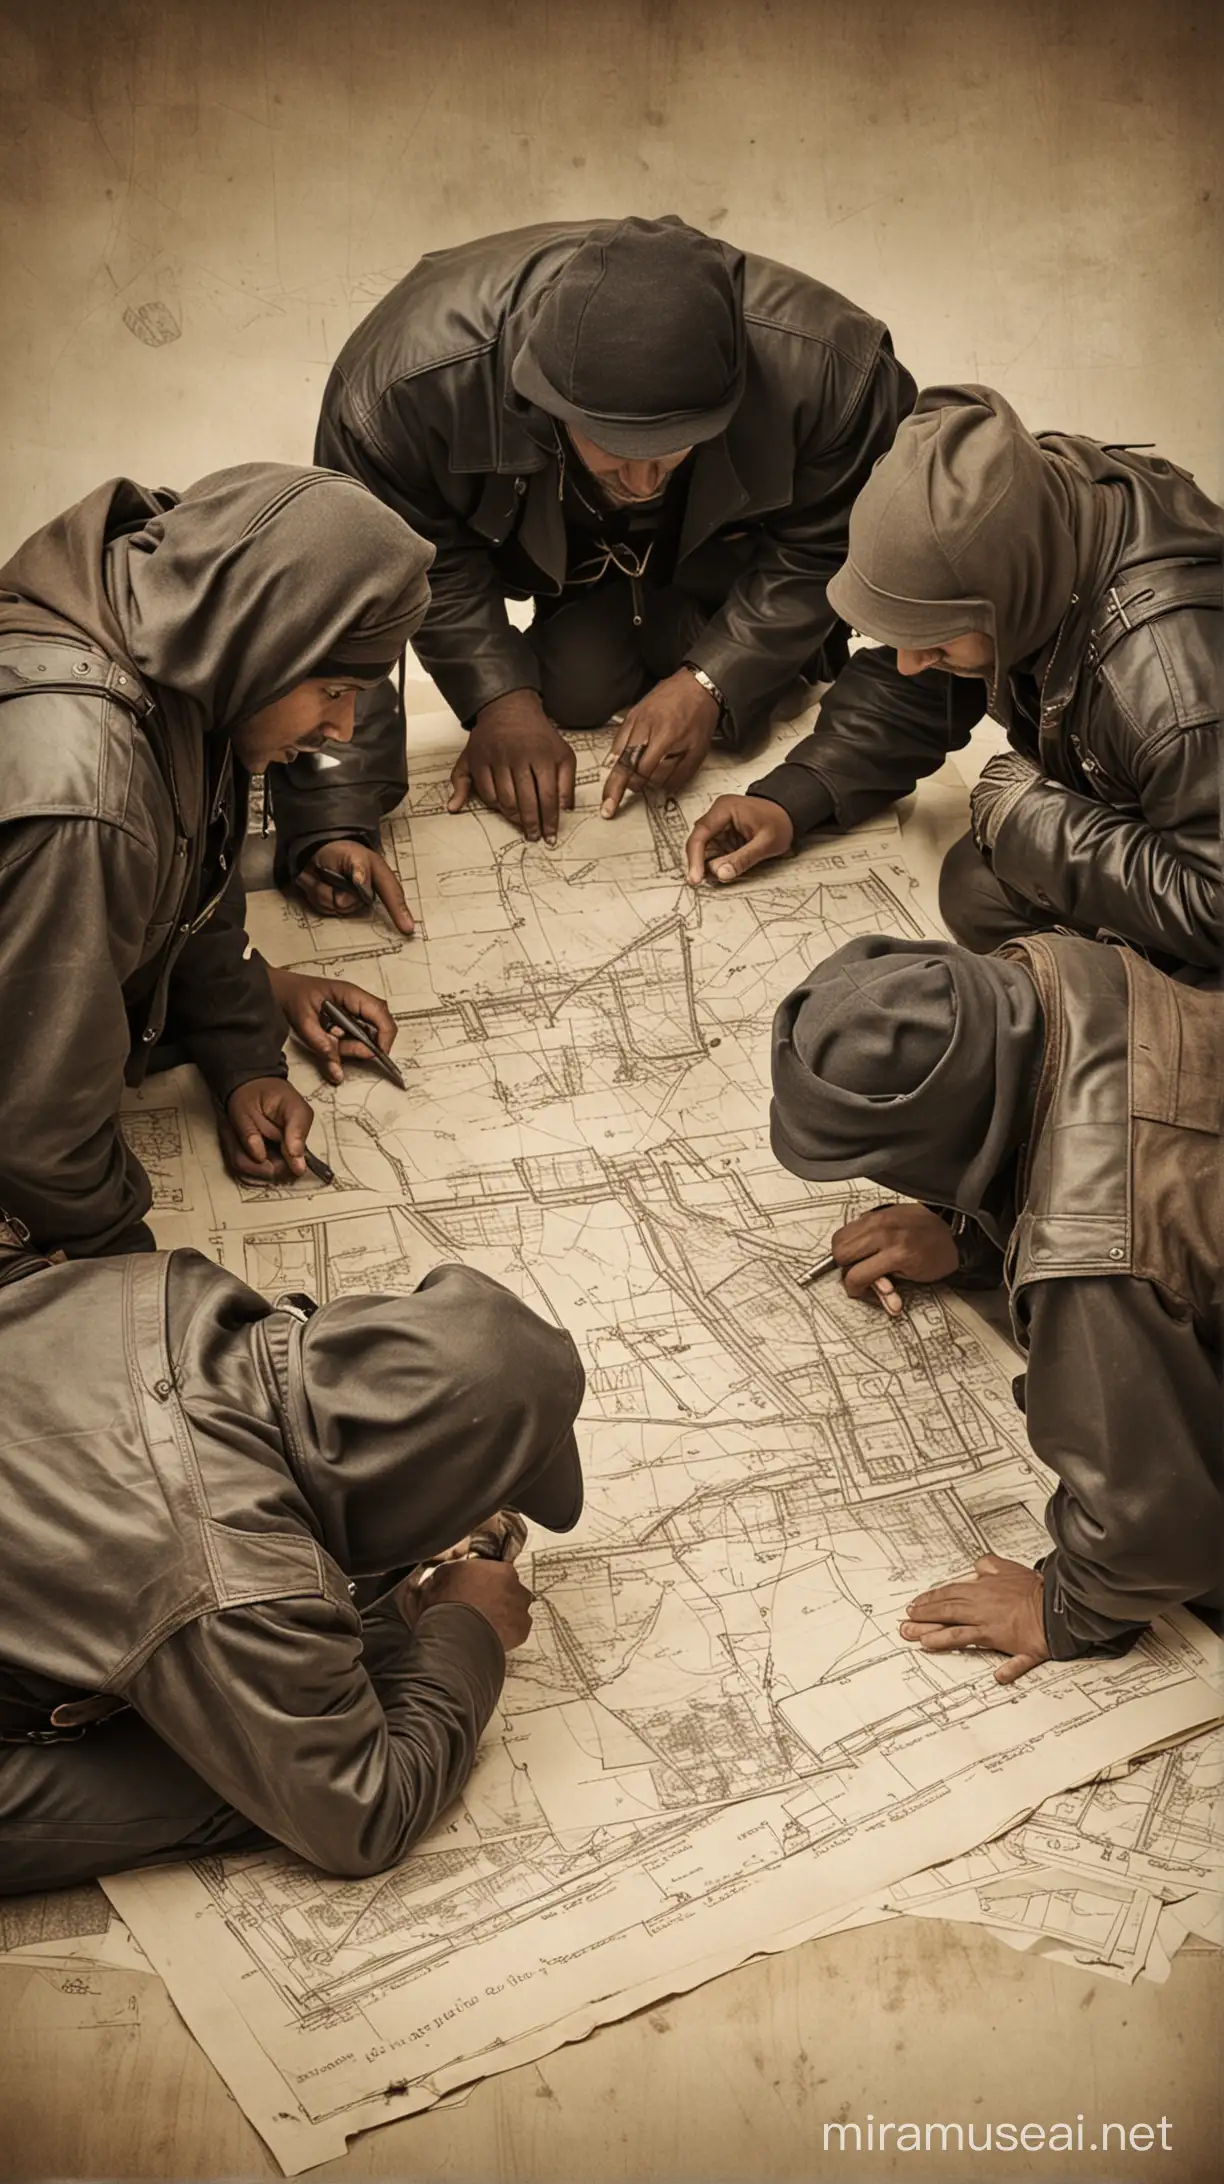 Show a group of thieves huddled together, looking at blueprints or maps of the bank.